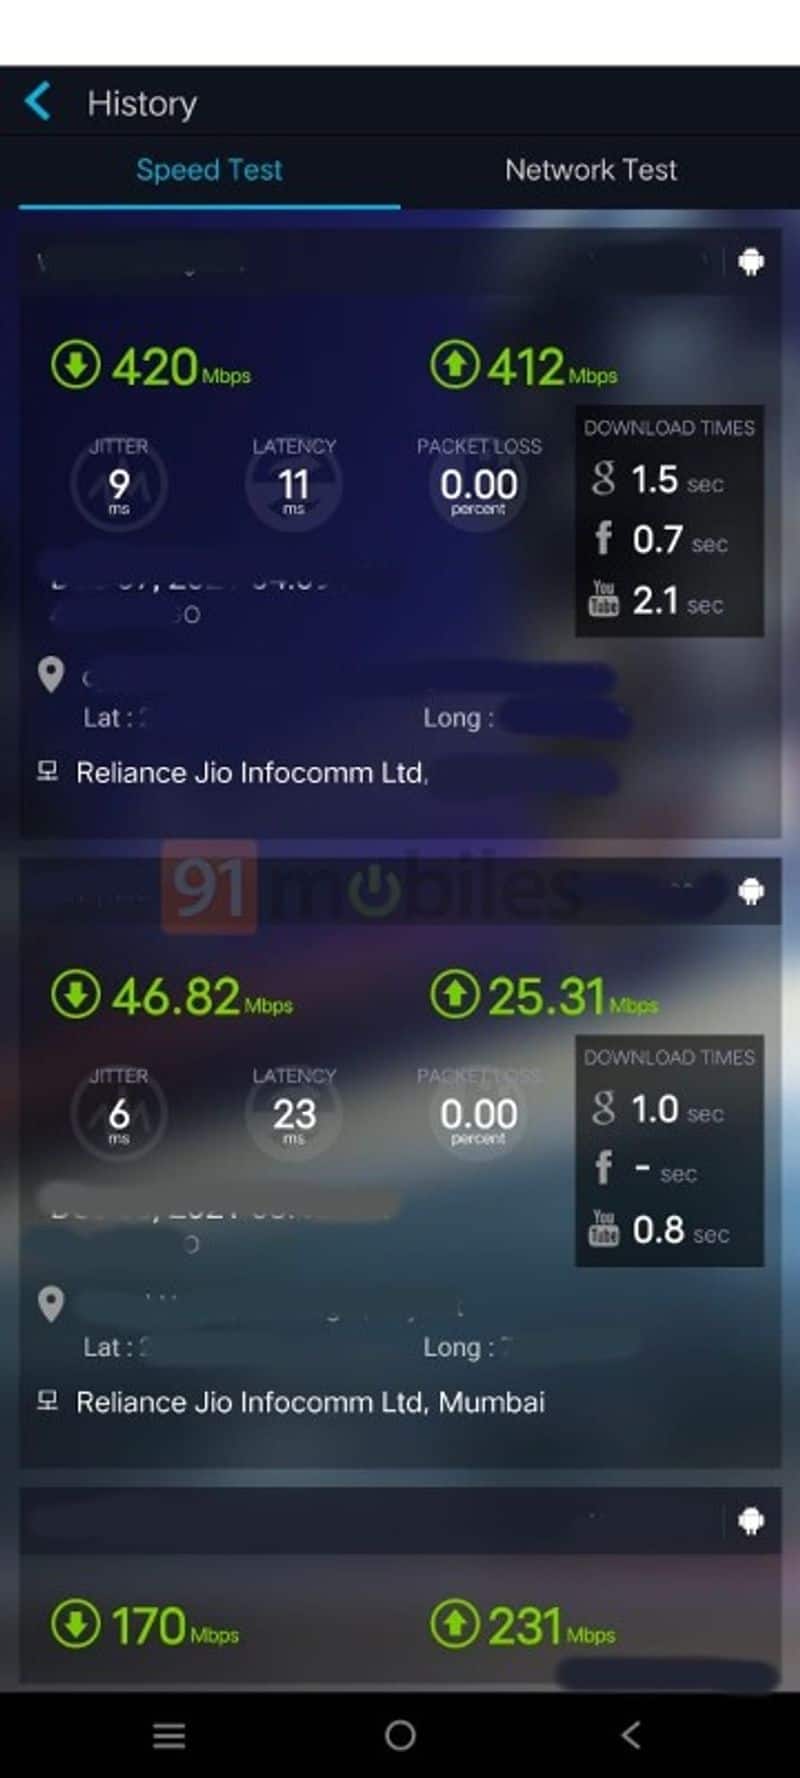 Reliance Jio 5G speed test 8 times faster download 15 times faster upload speed than 4G mnj